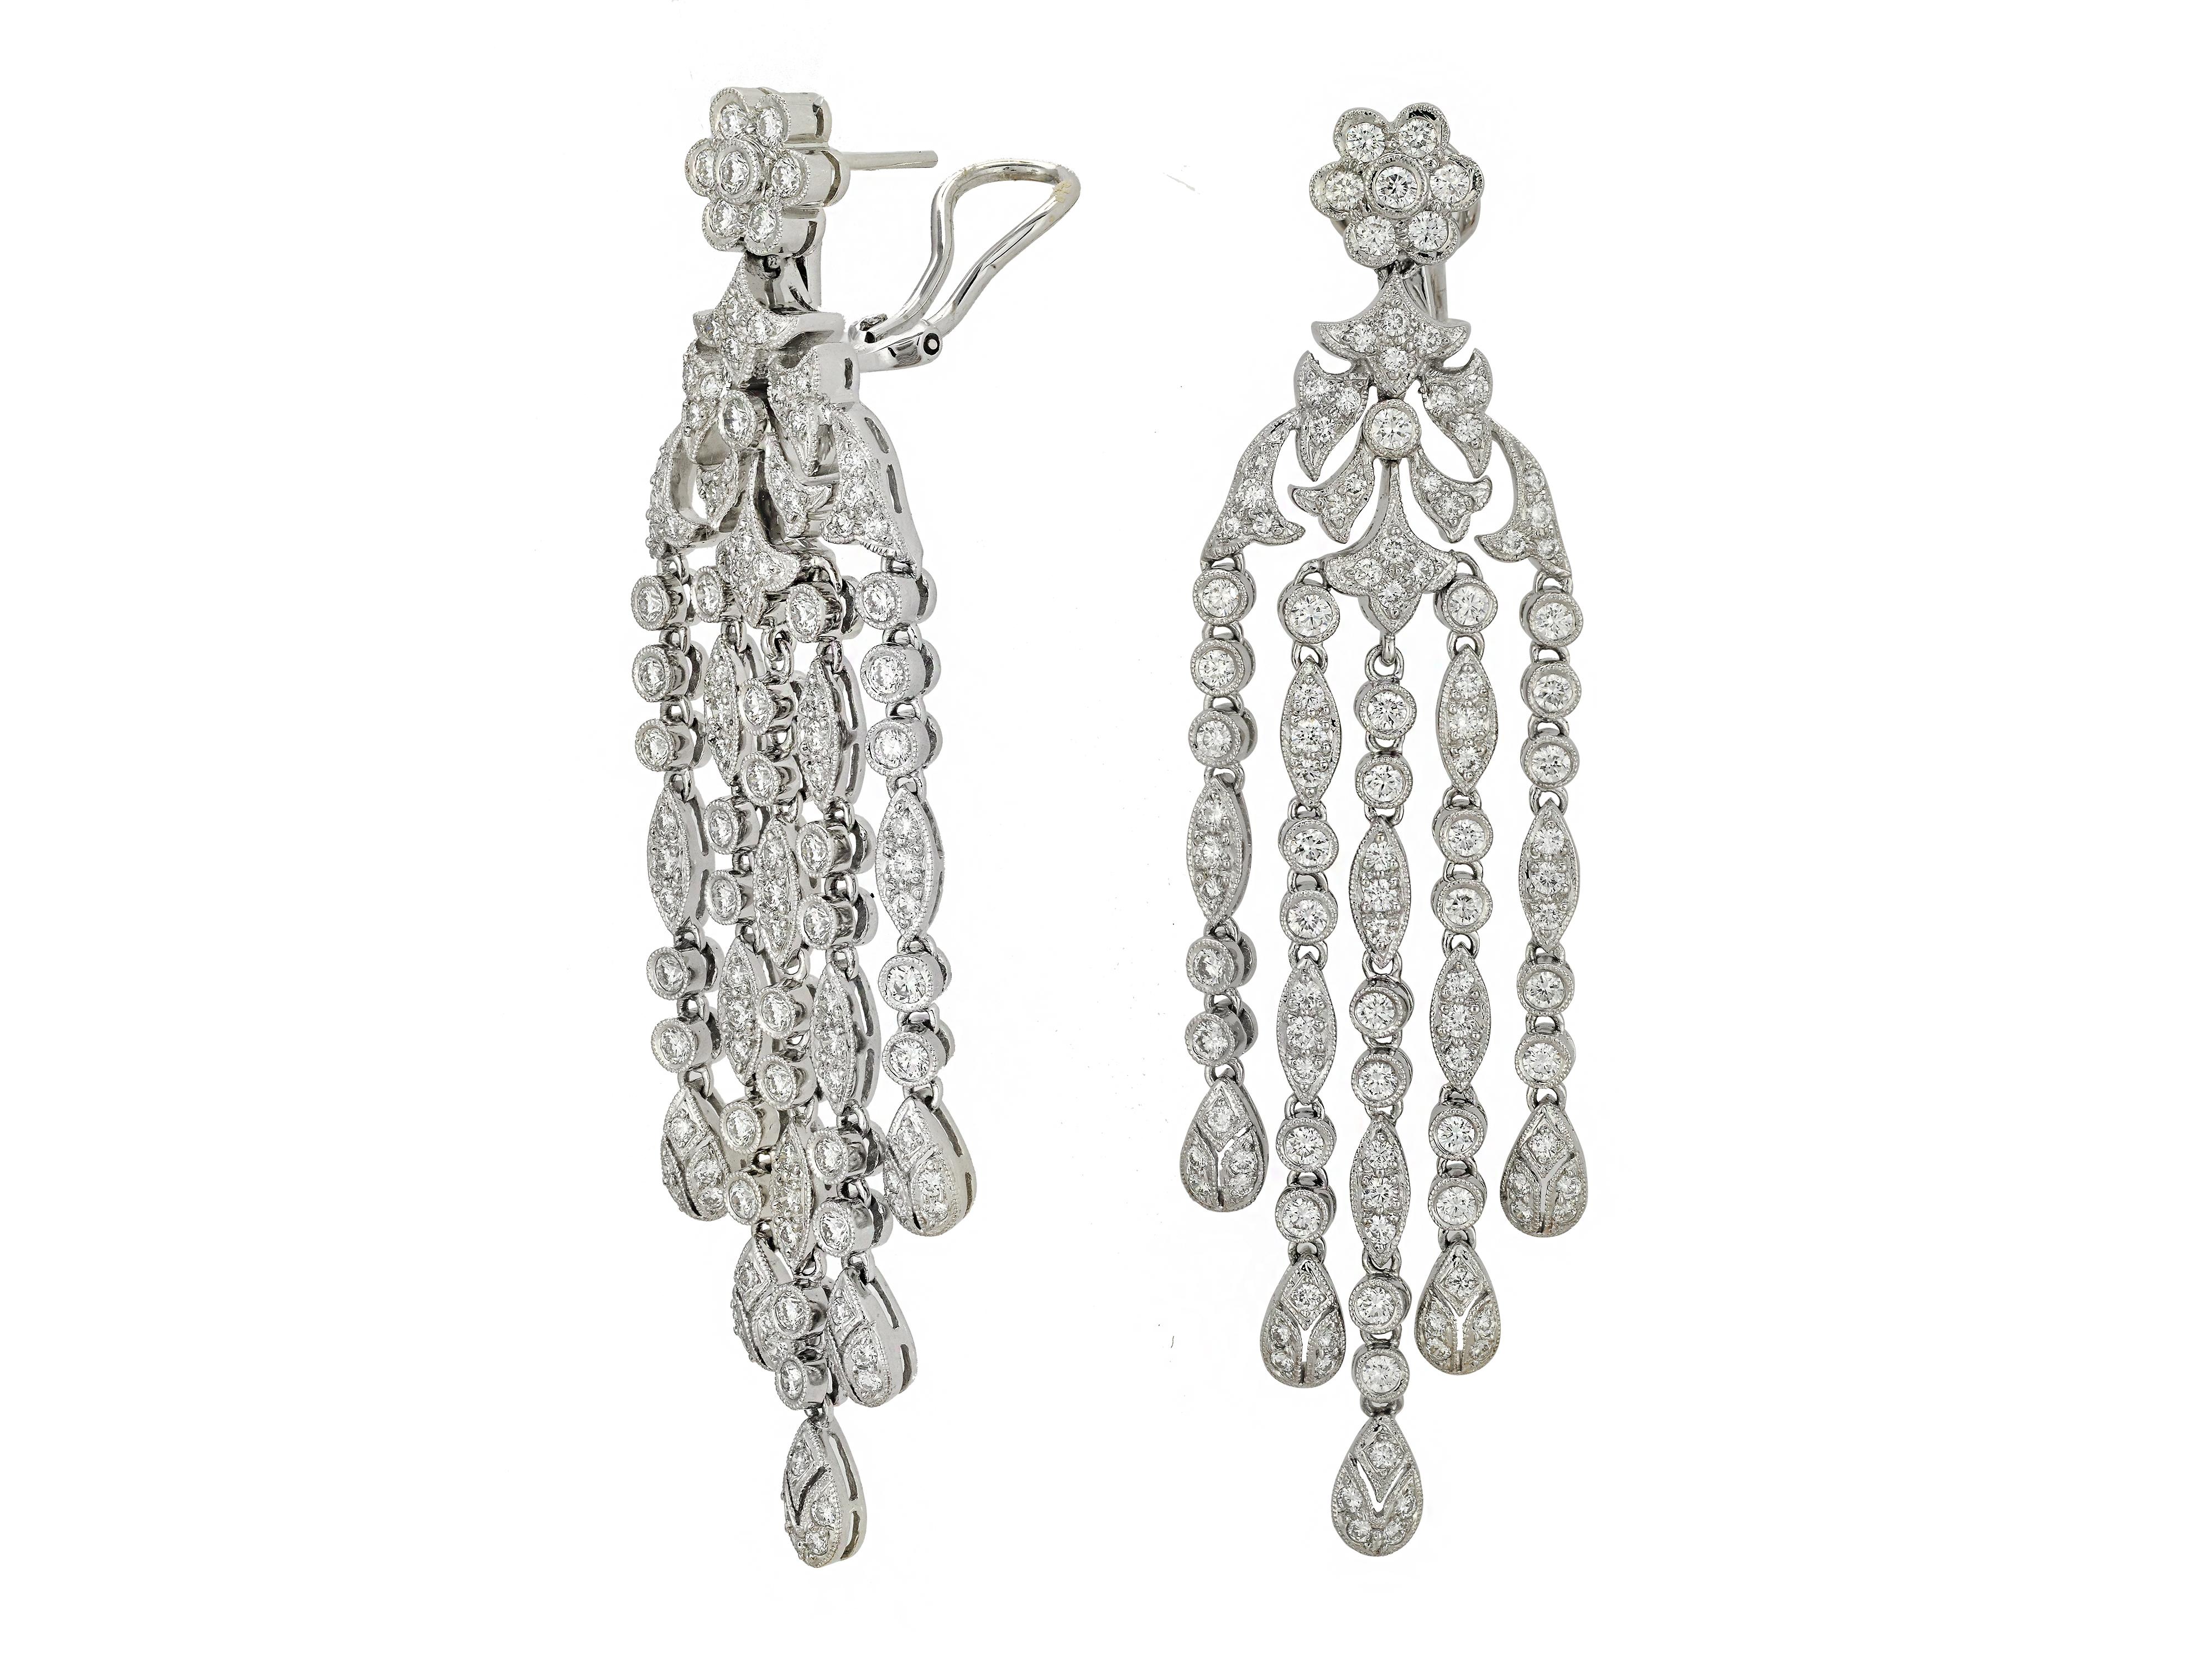 18 Karat White Gold Waterfall Earrings With 218 Prong & Bezel Set Round Diamonds Totaling Approximately 5.00 Carats of VS Clarity & G Color. 5 Articulated Drops Move With The Wearer. Pierced Post With Supportive Omega Clip Back.